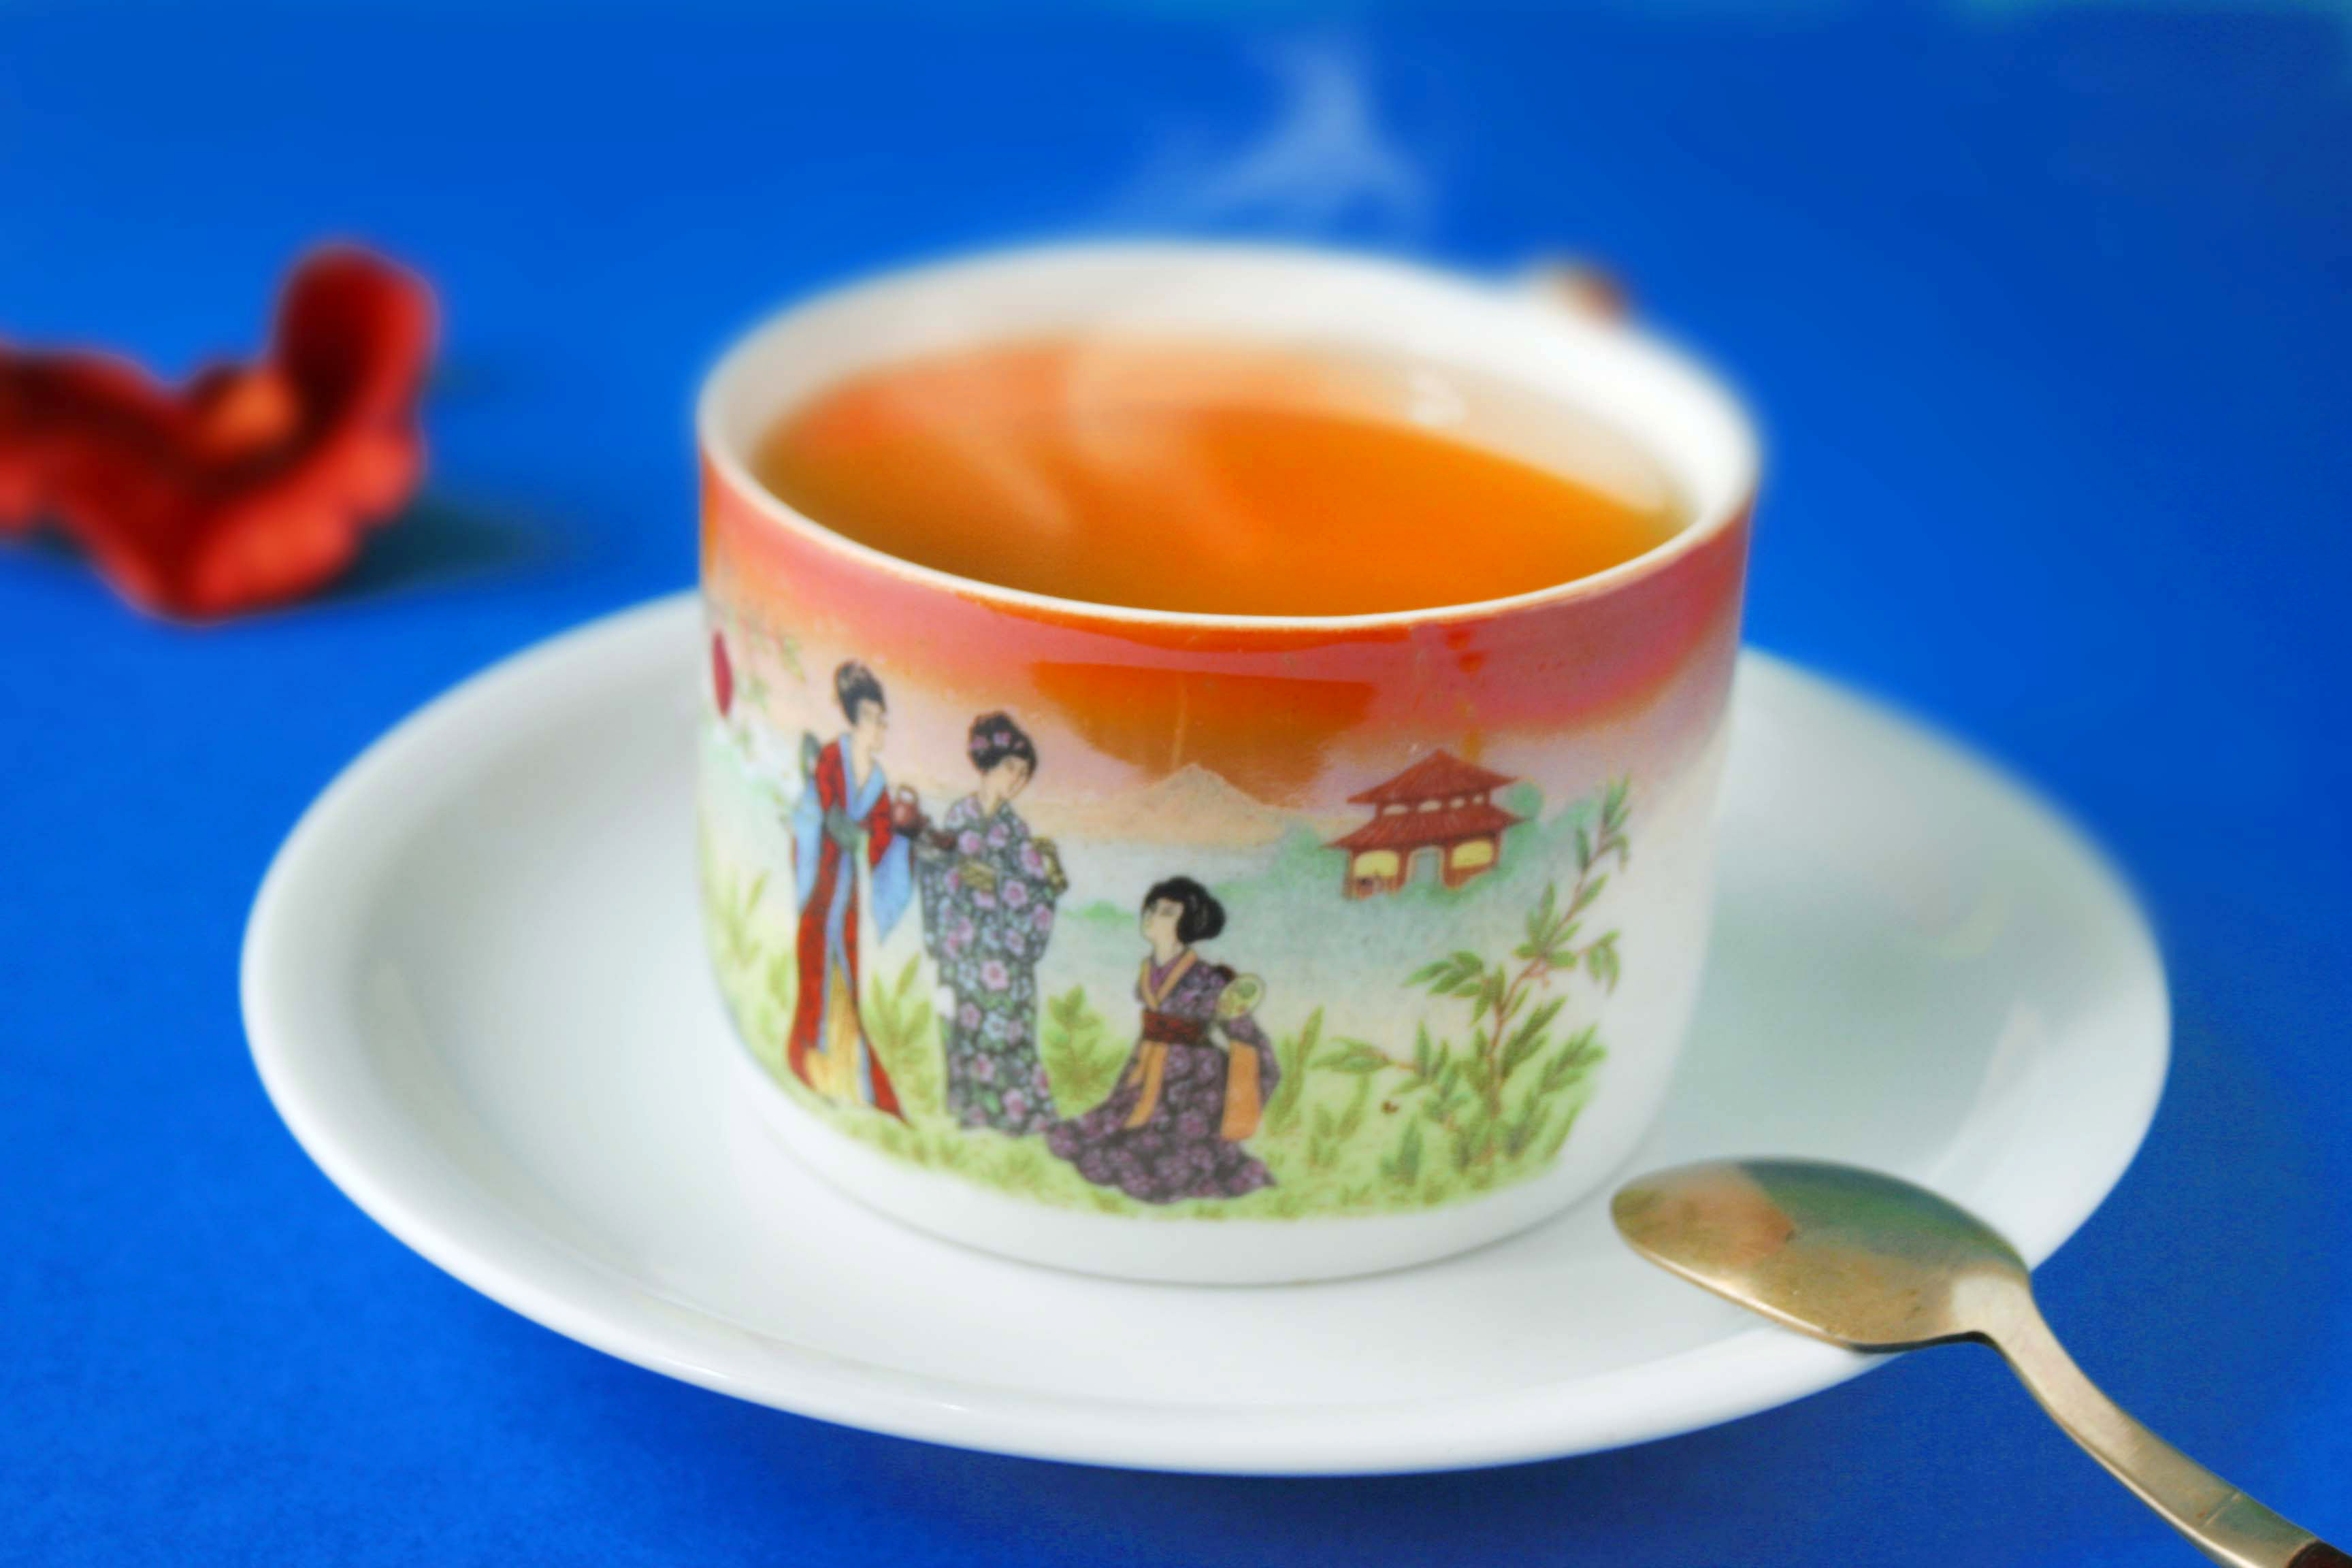 Tea found to play a major role in the fight against dementia